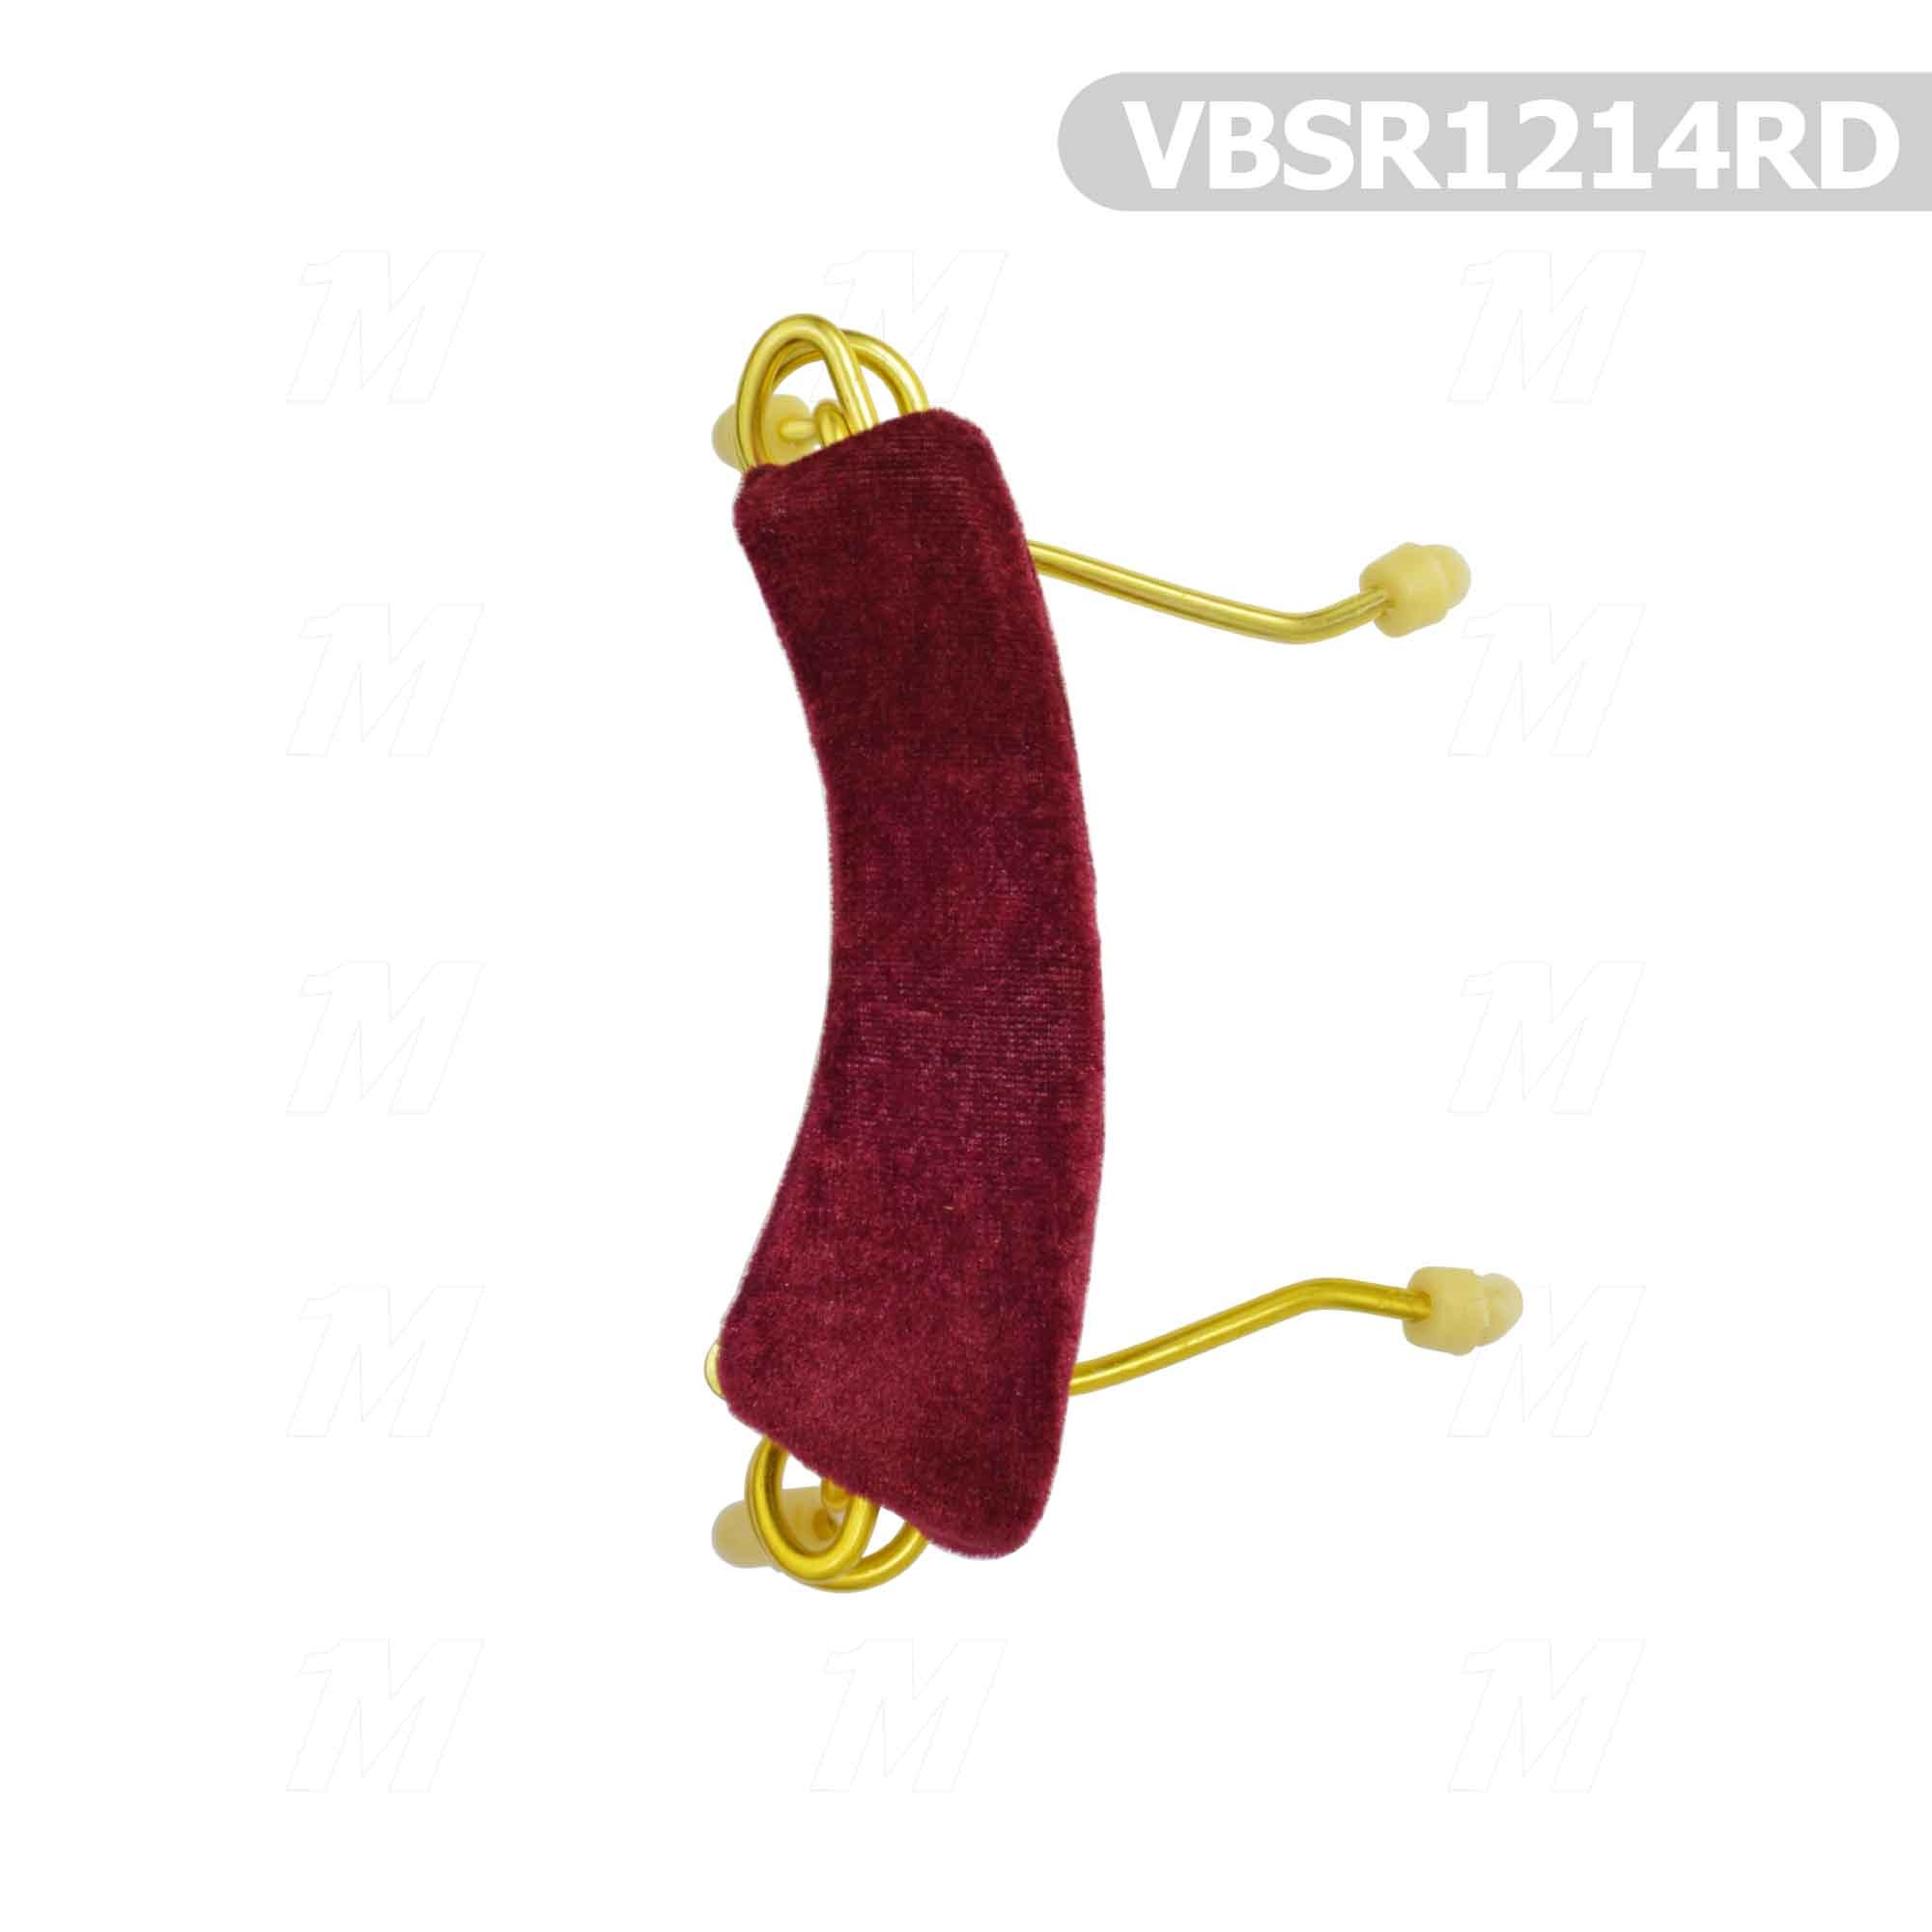 VIOLIN CUSHİON RED METAL 3/4 and 4/4 VBSR44RD